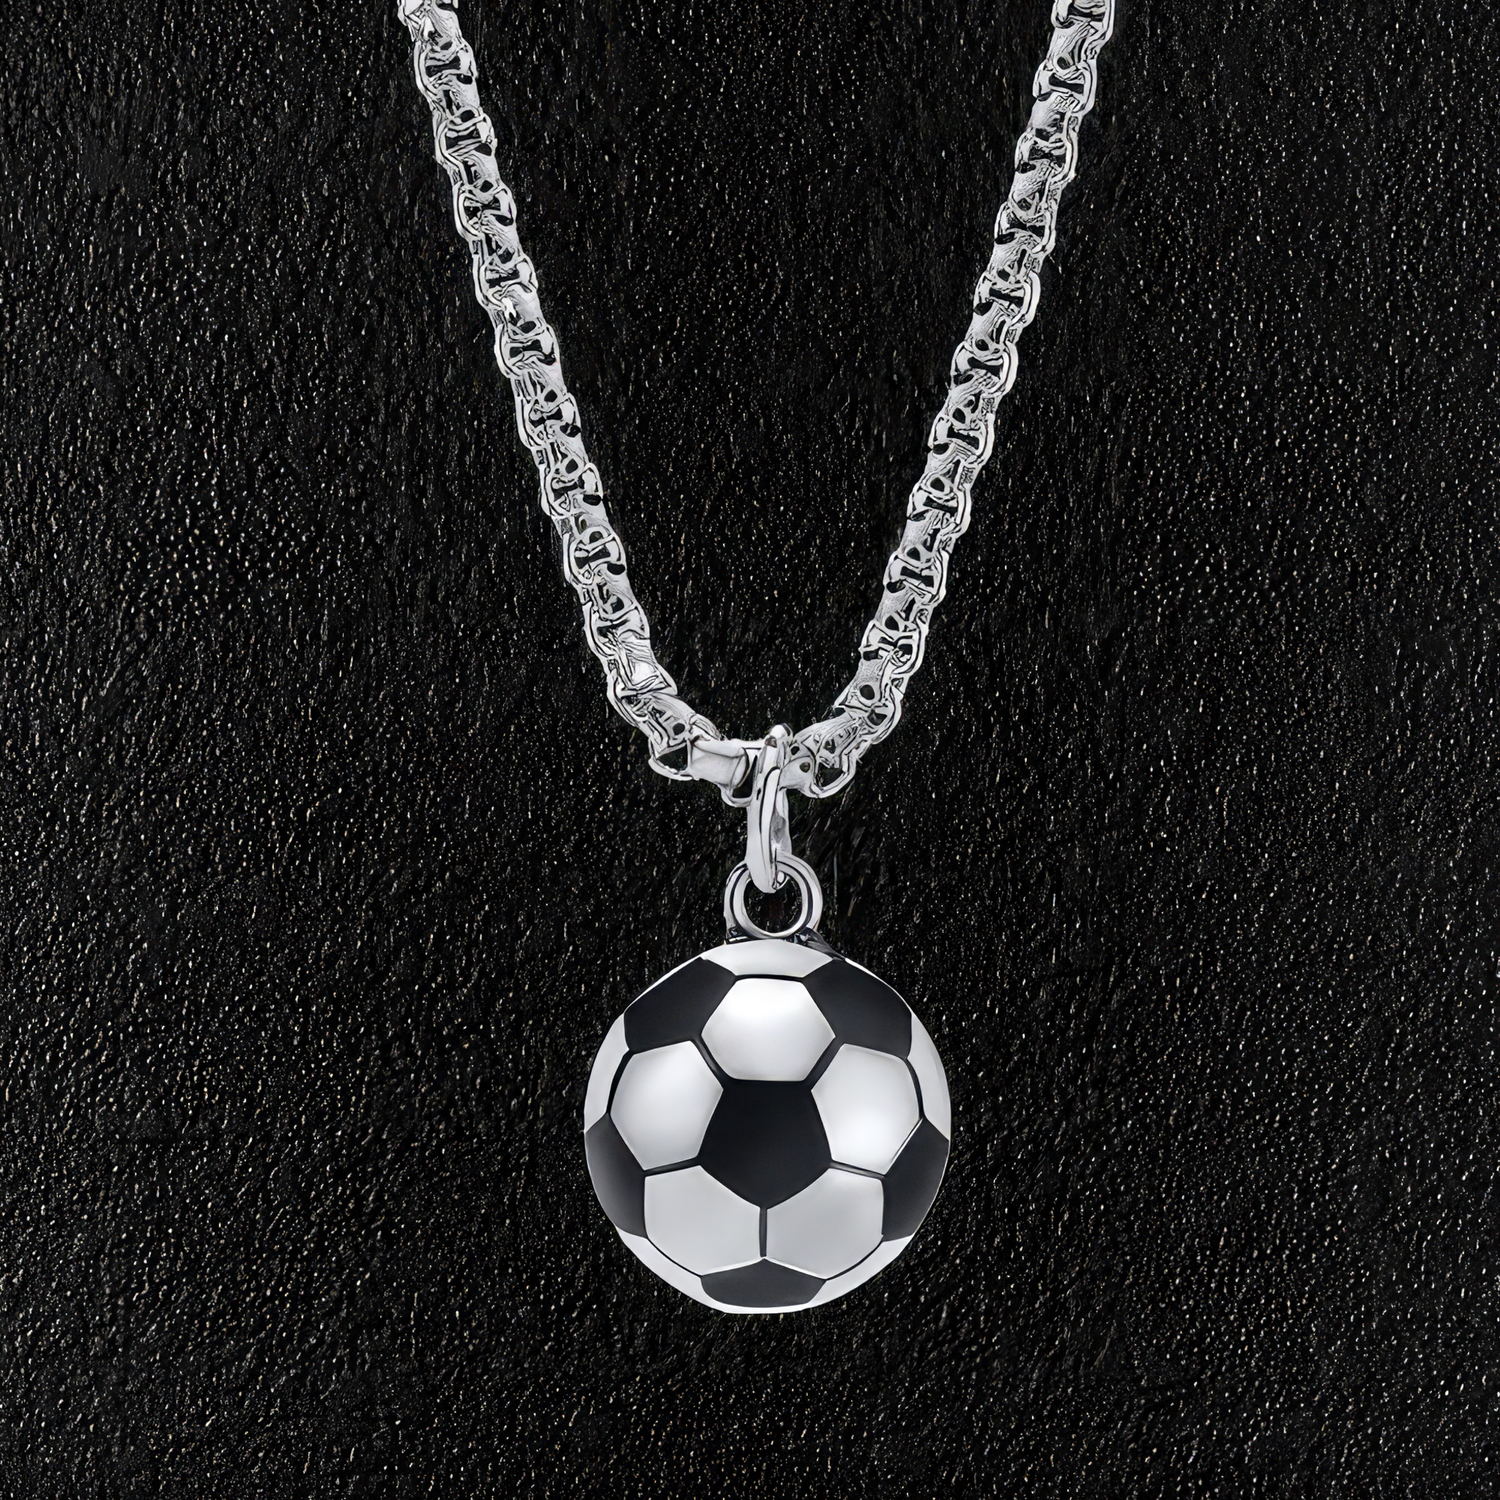 Soccer Ball Necklace Men Stainless Steel Wheat Rope Chain Sport Pendant  Soccer Gifts | Amazon.com